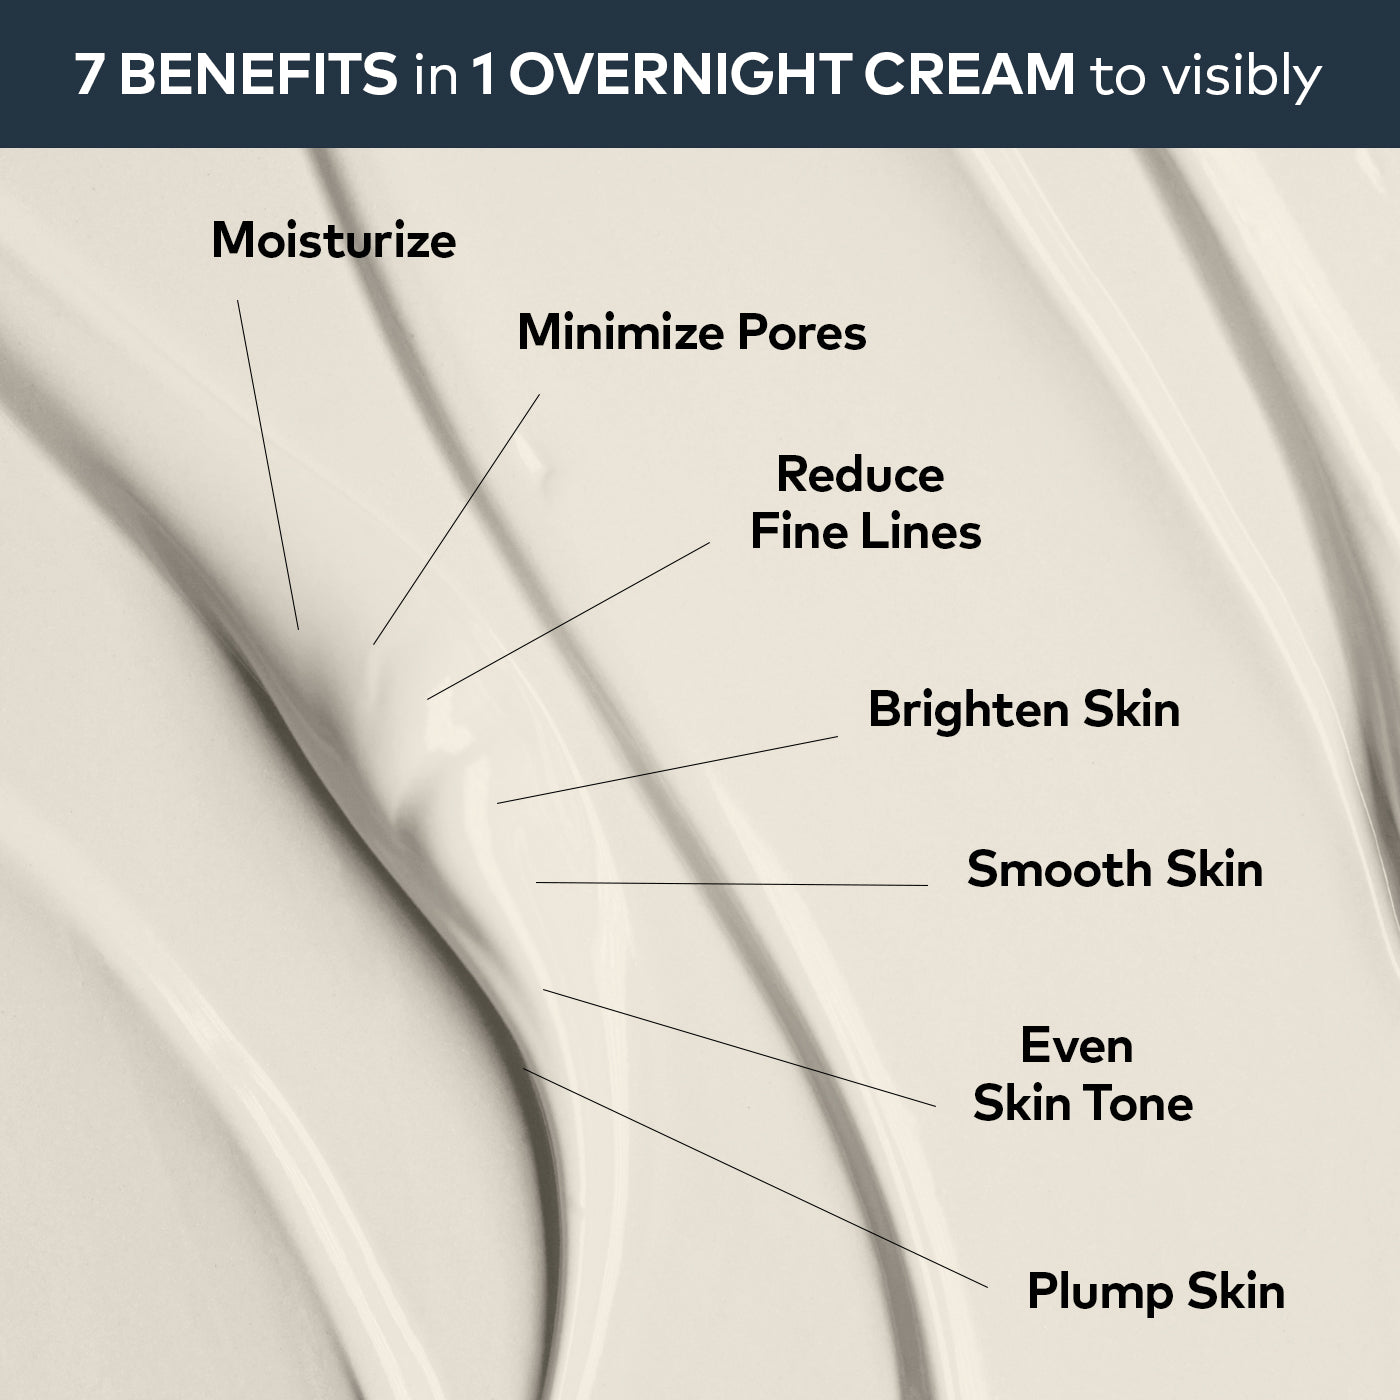 An infographic with the smooth, white, velvety cream in the background that reads "7 Benefits in 1 Overnight Cream to visibly moisturize, minimize pores, reduce fine lines, brighten skin, smooth skin, even skin tone, and plump skin."